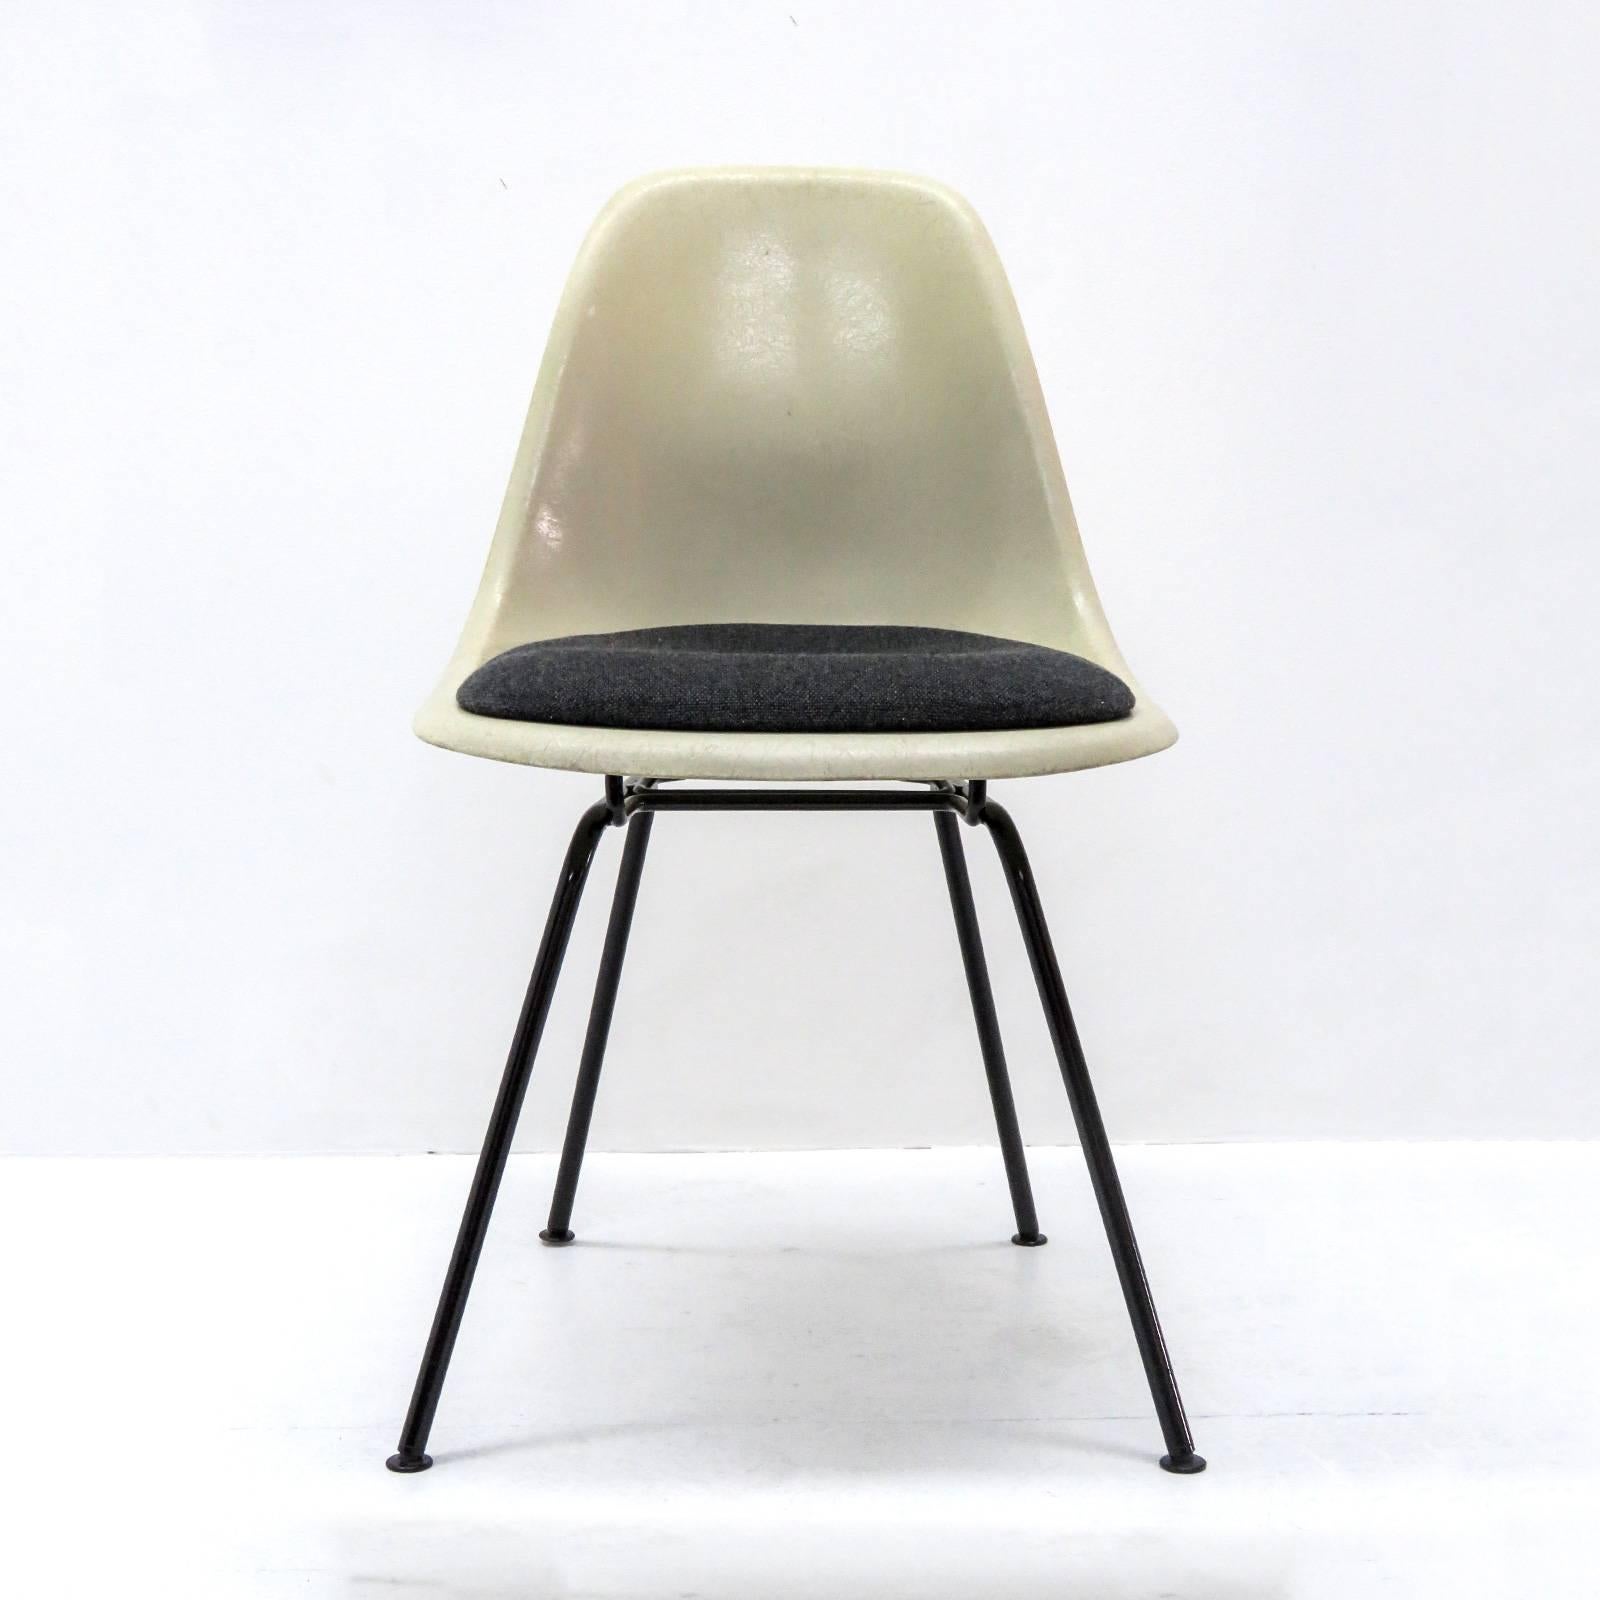 Elegant iconic DSX chairs by Charles & Ray Eames for Herman Miller, with parchment colored fiberglass shells in very good to excellent condition, black enameled bases, original shocks and previously re-upholstered seat cushions in dark grey wool,